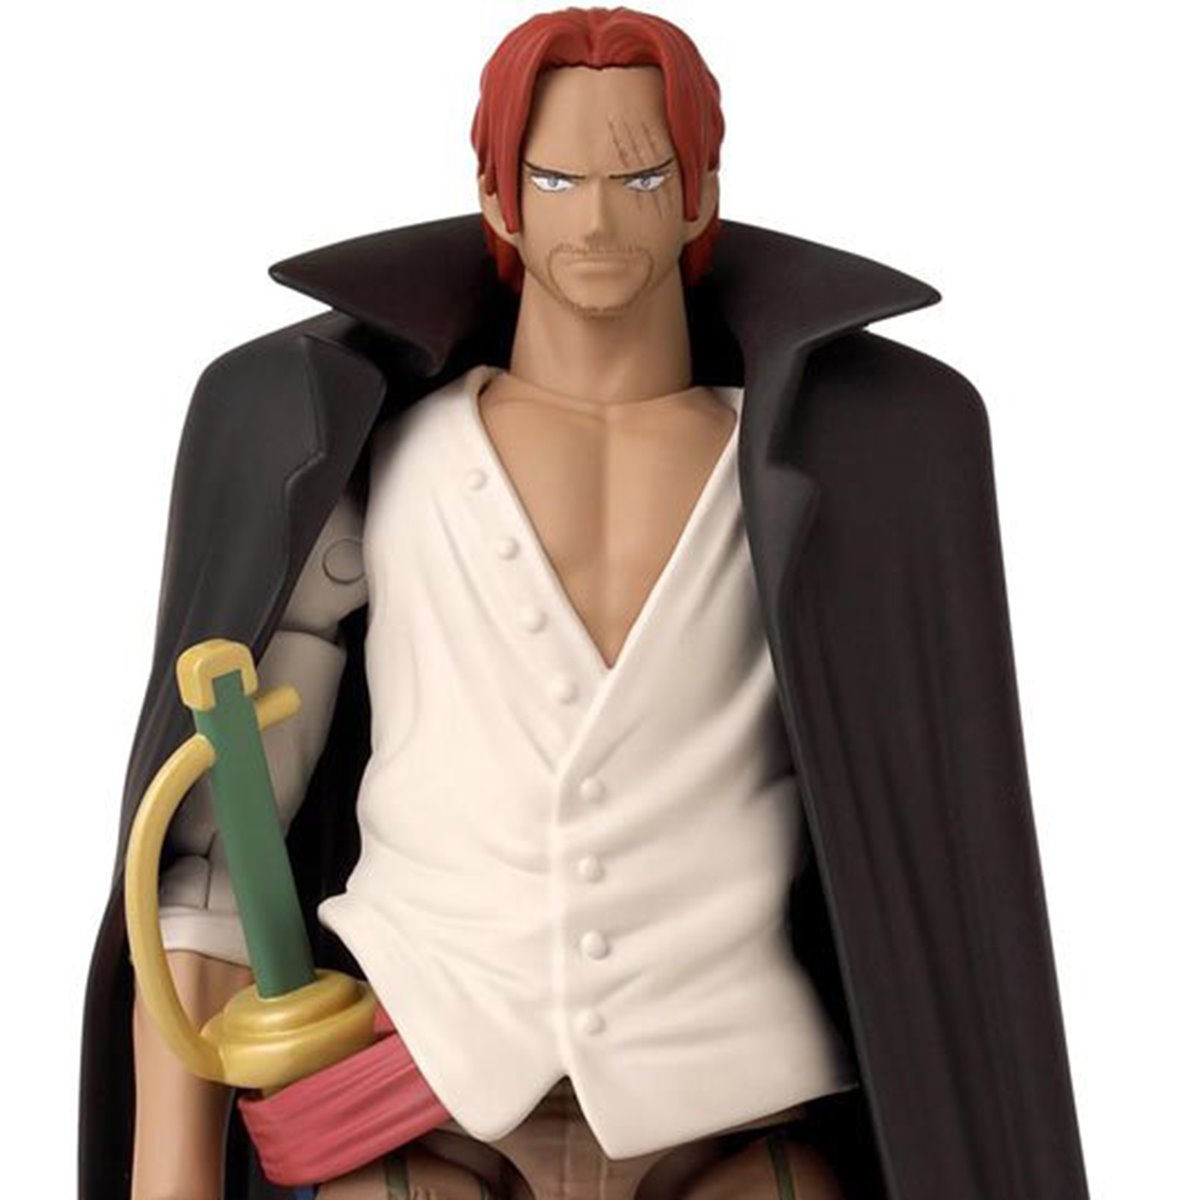 ANIME HEROES - One Piece - Brook Action Figure